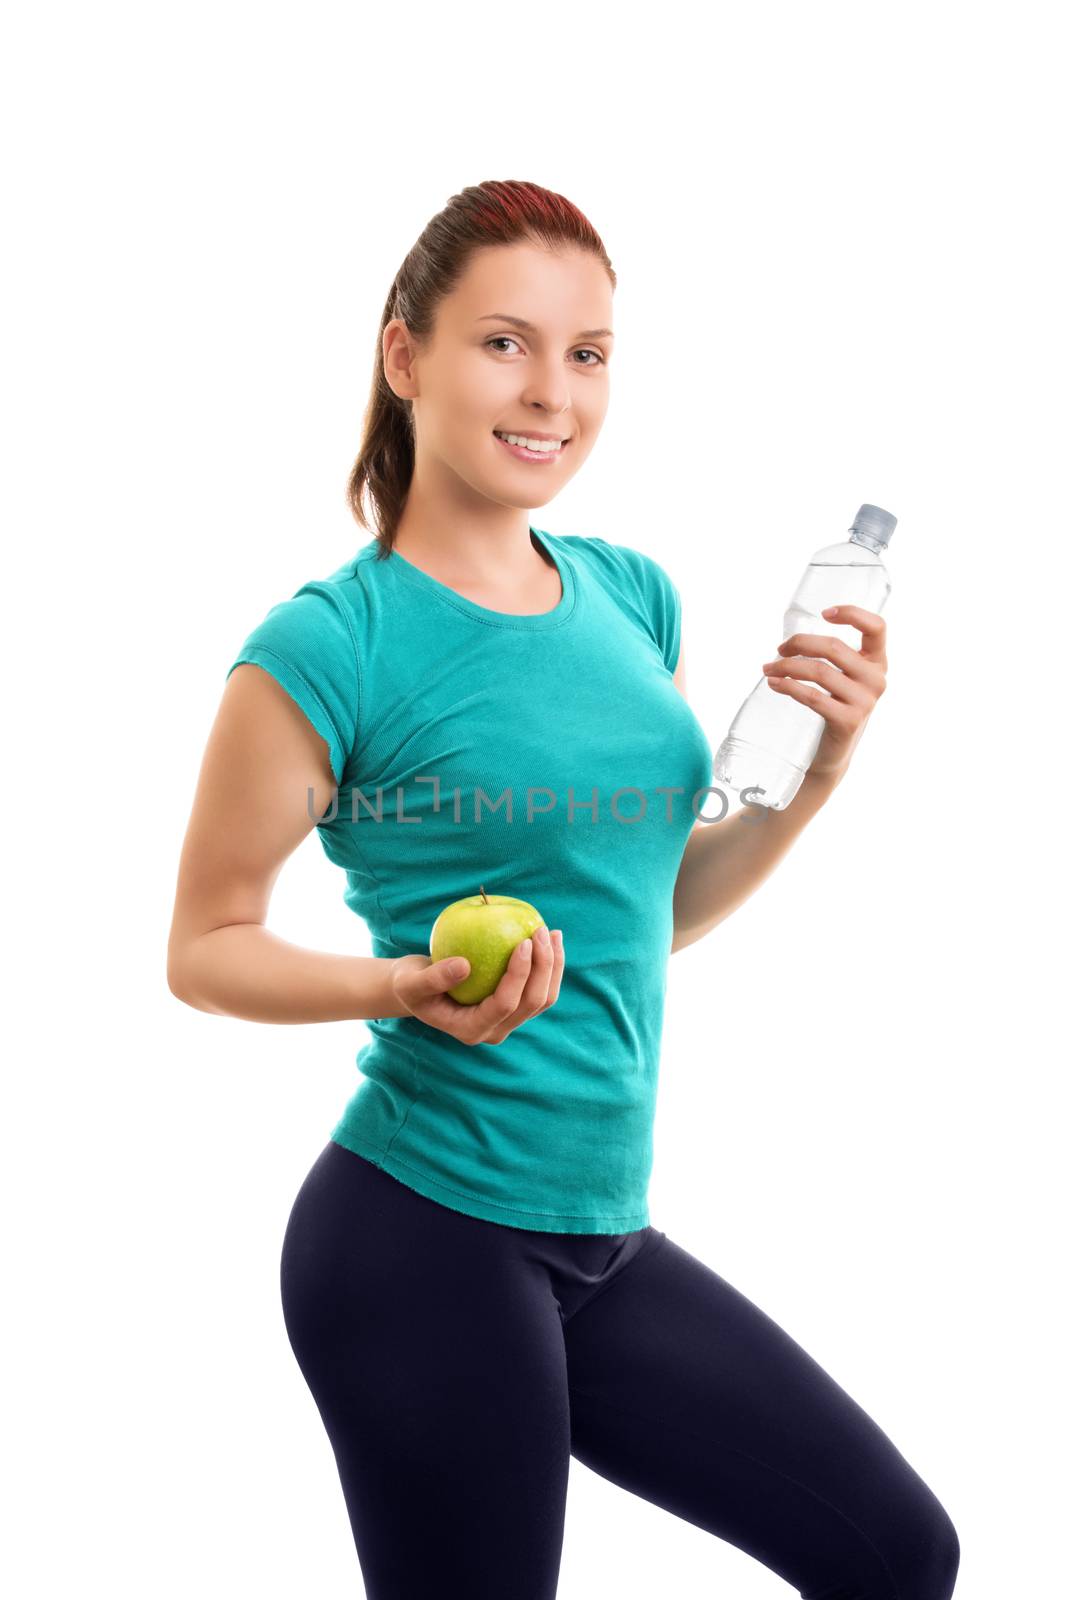 Young girl holding an apple and a bottle by Mendelex